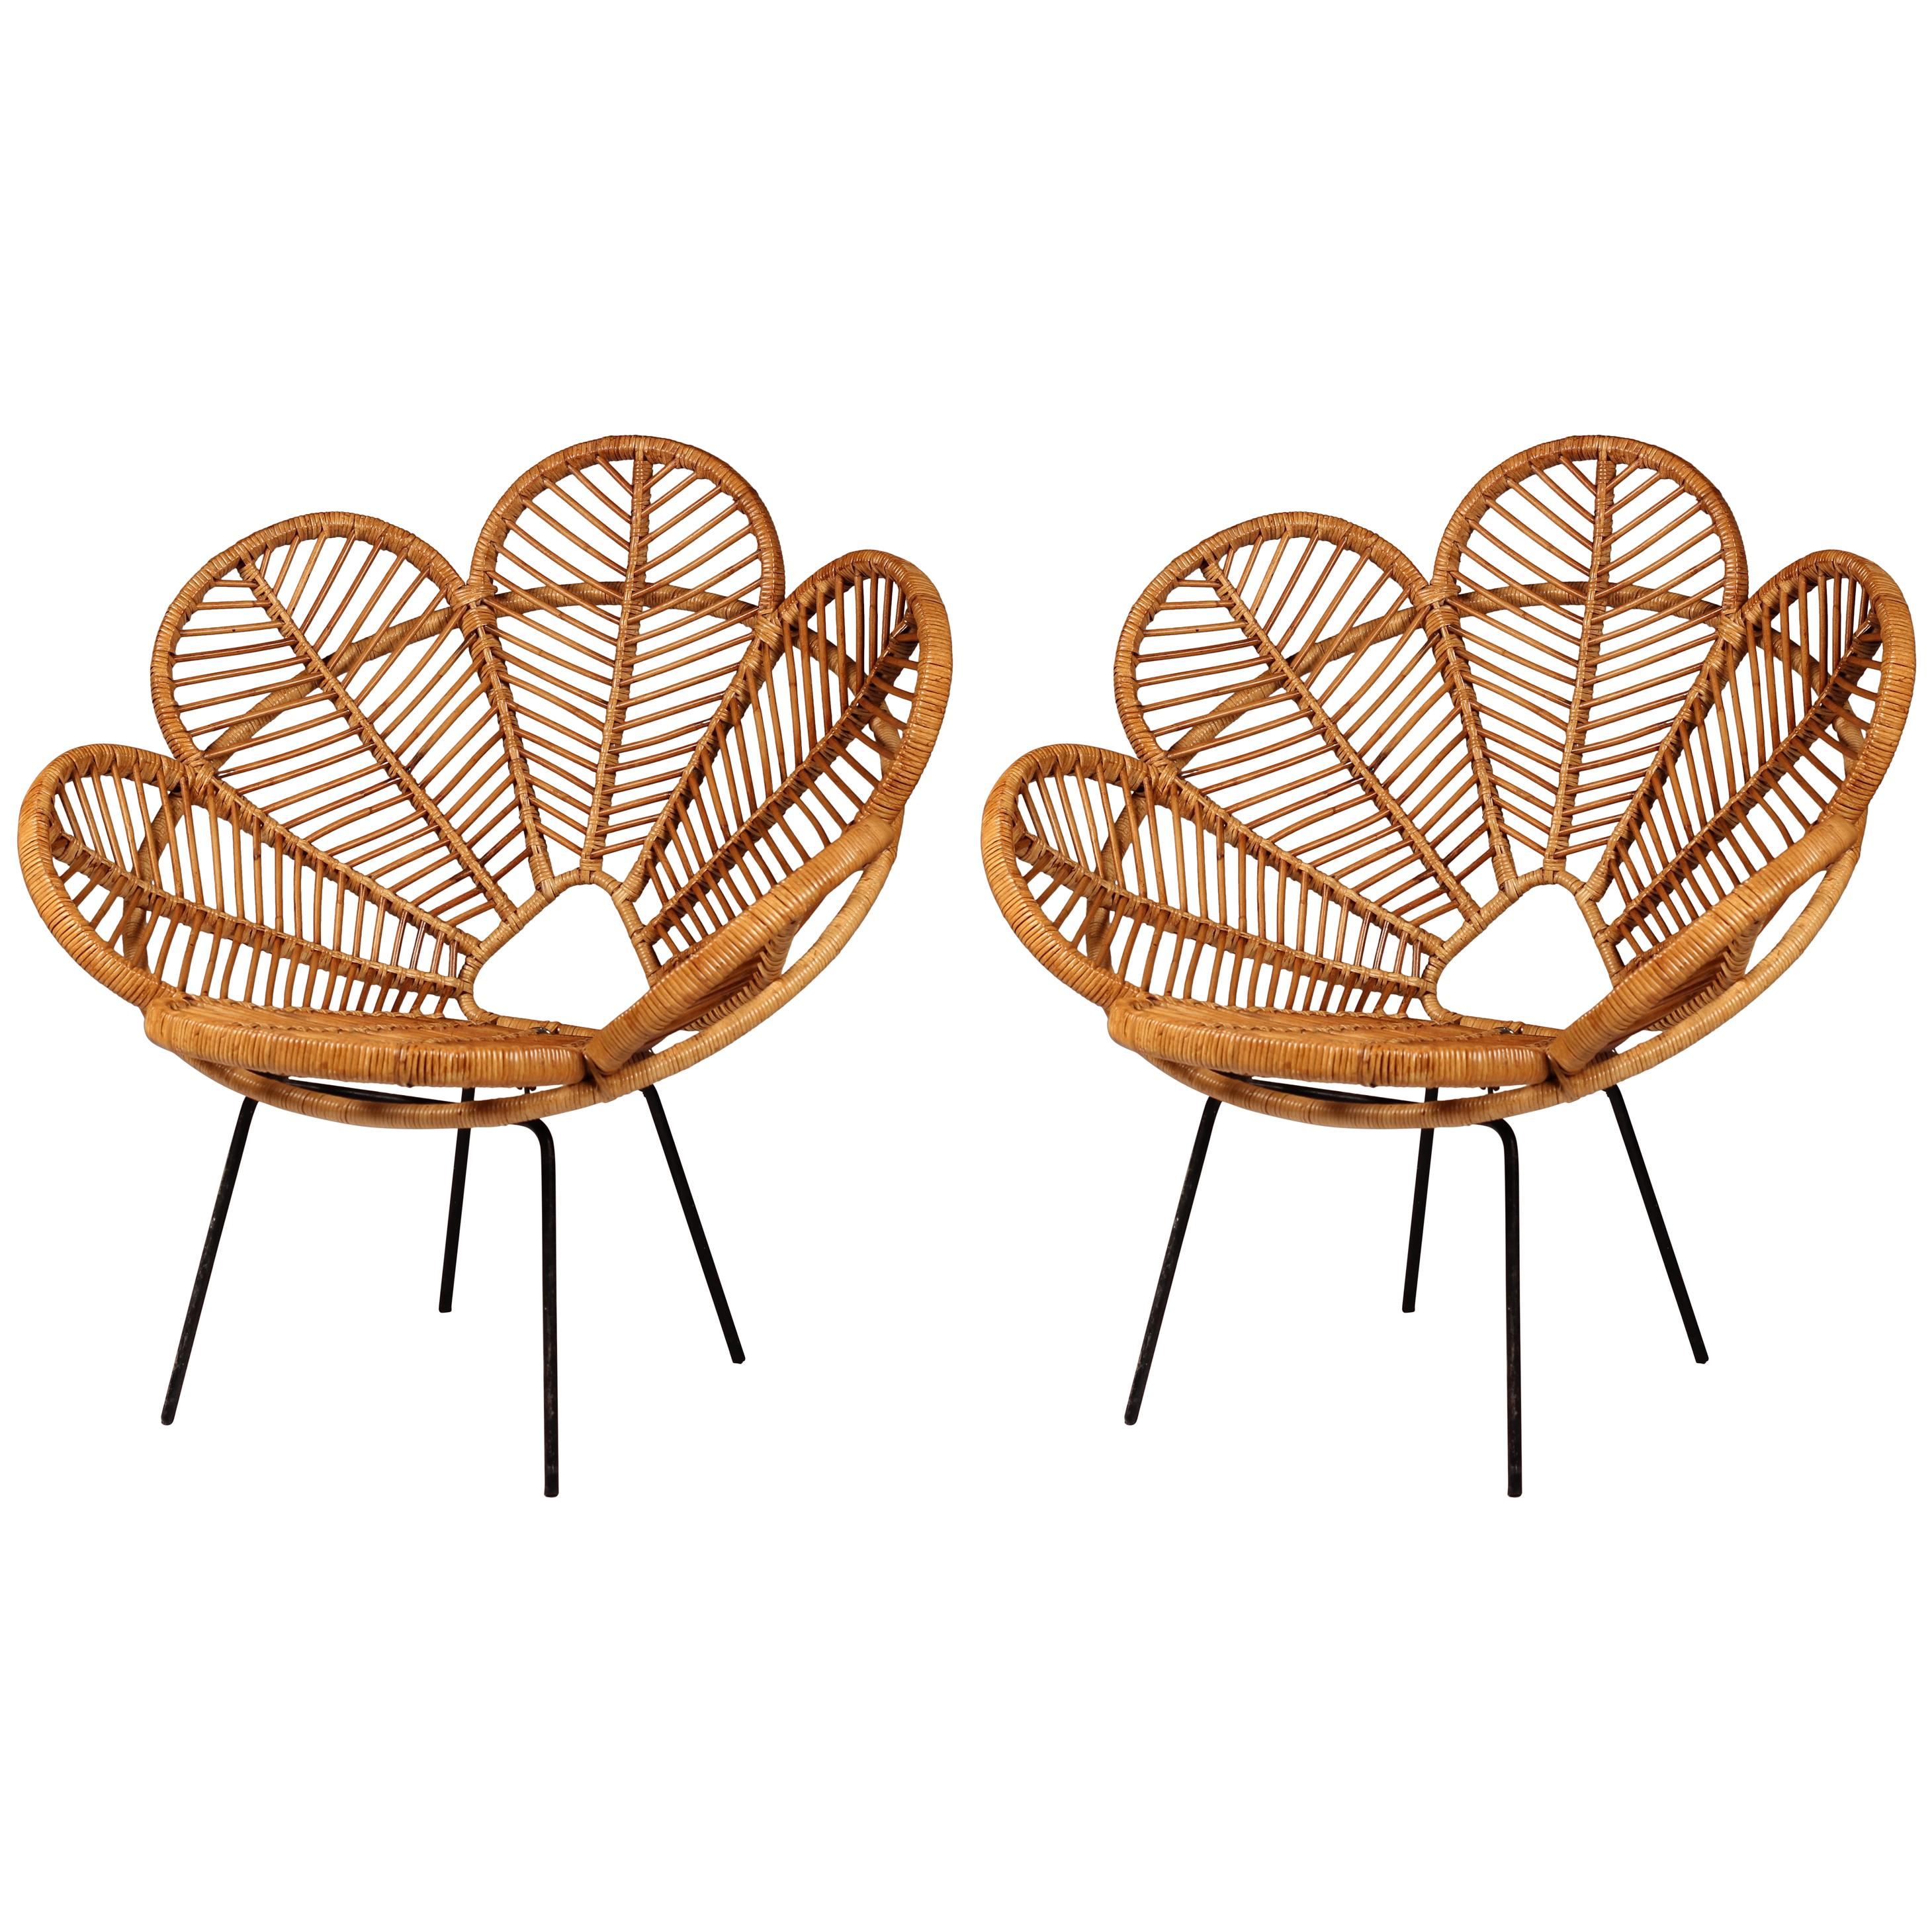 Pair of Garden Chairs Mid Century French Design in Cane, Wicker and Raffia